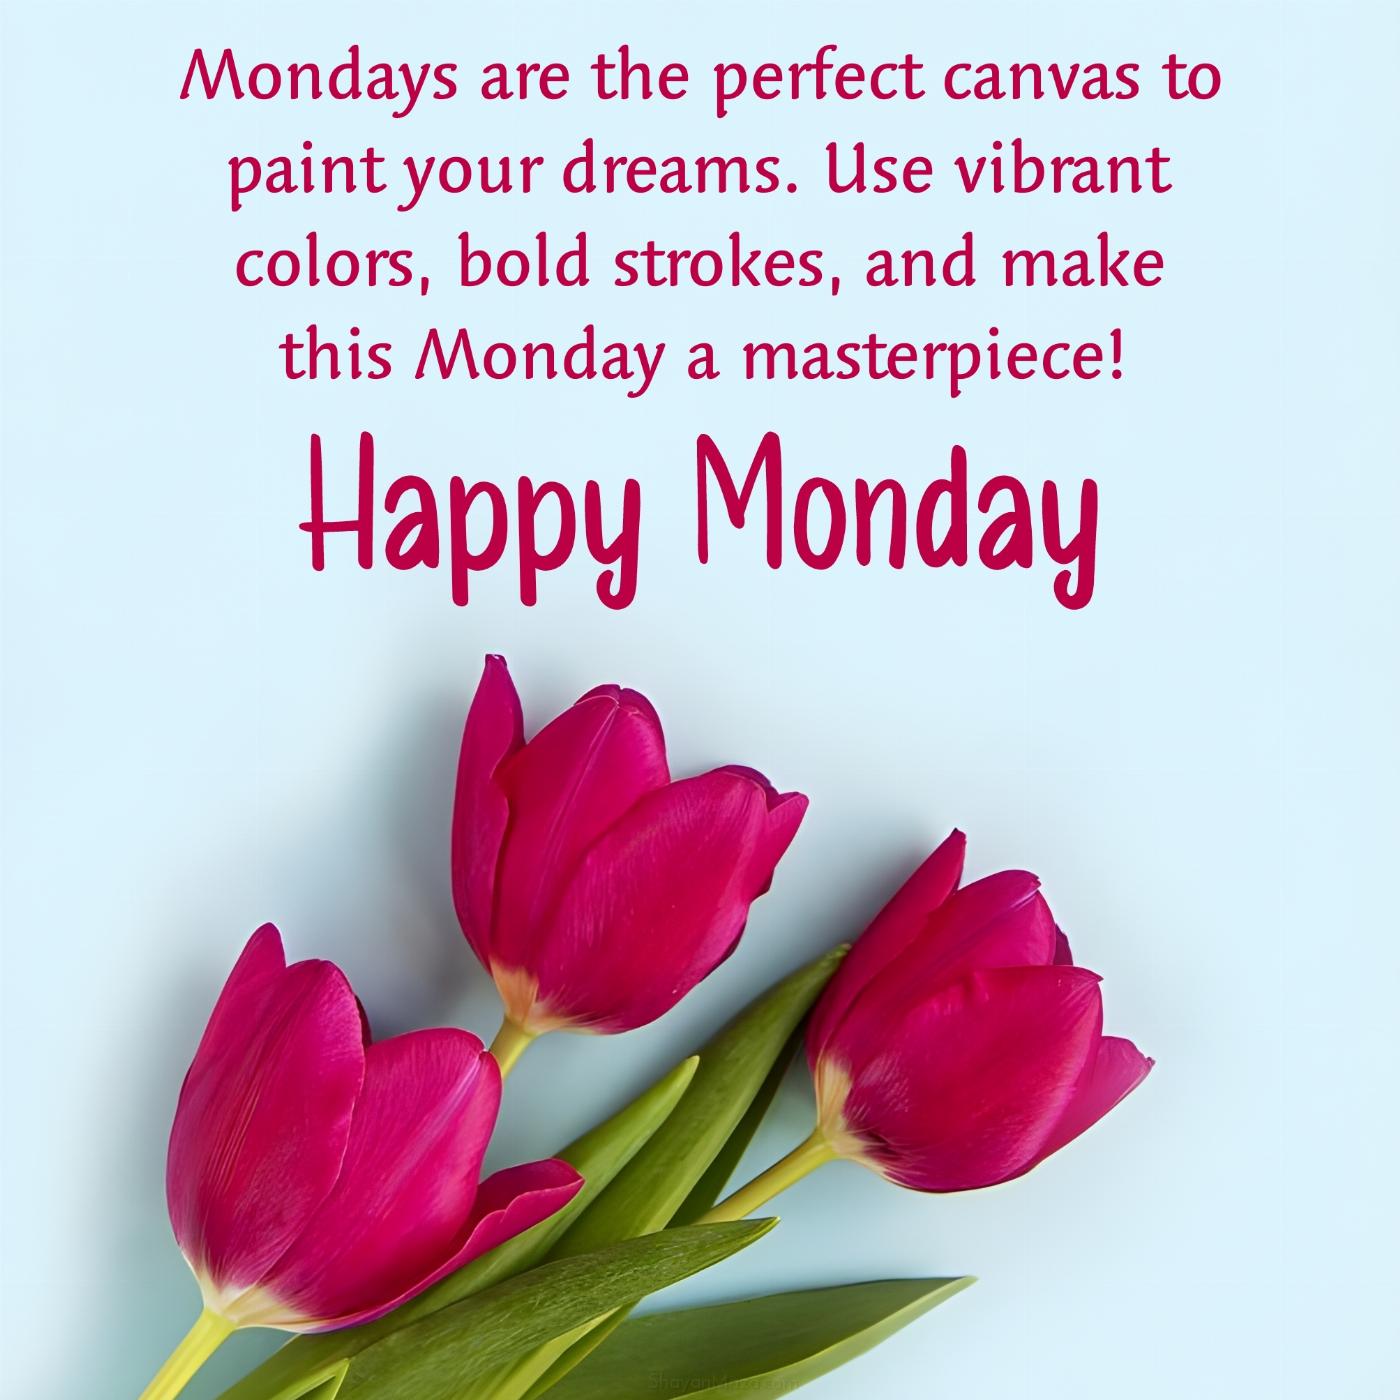 Mondays are the perfect canvas to paint your dreams